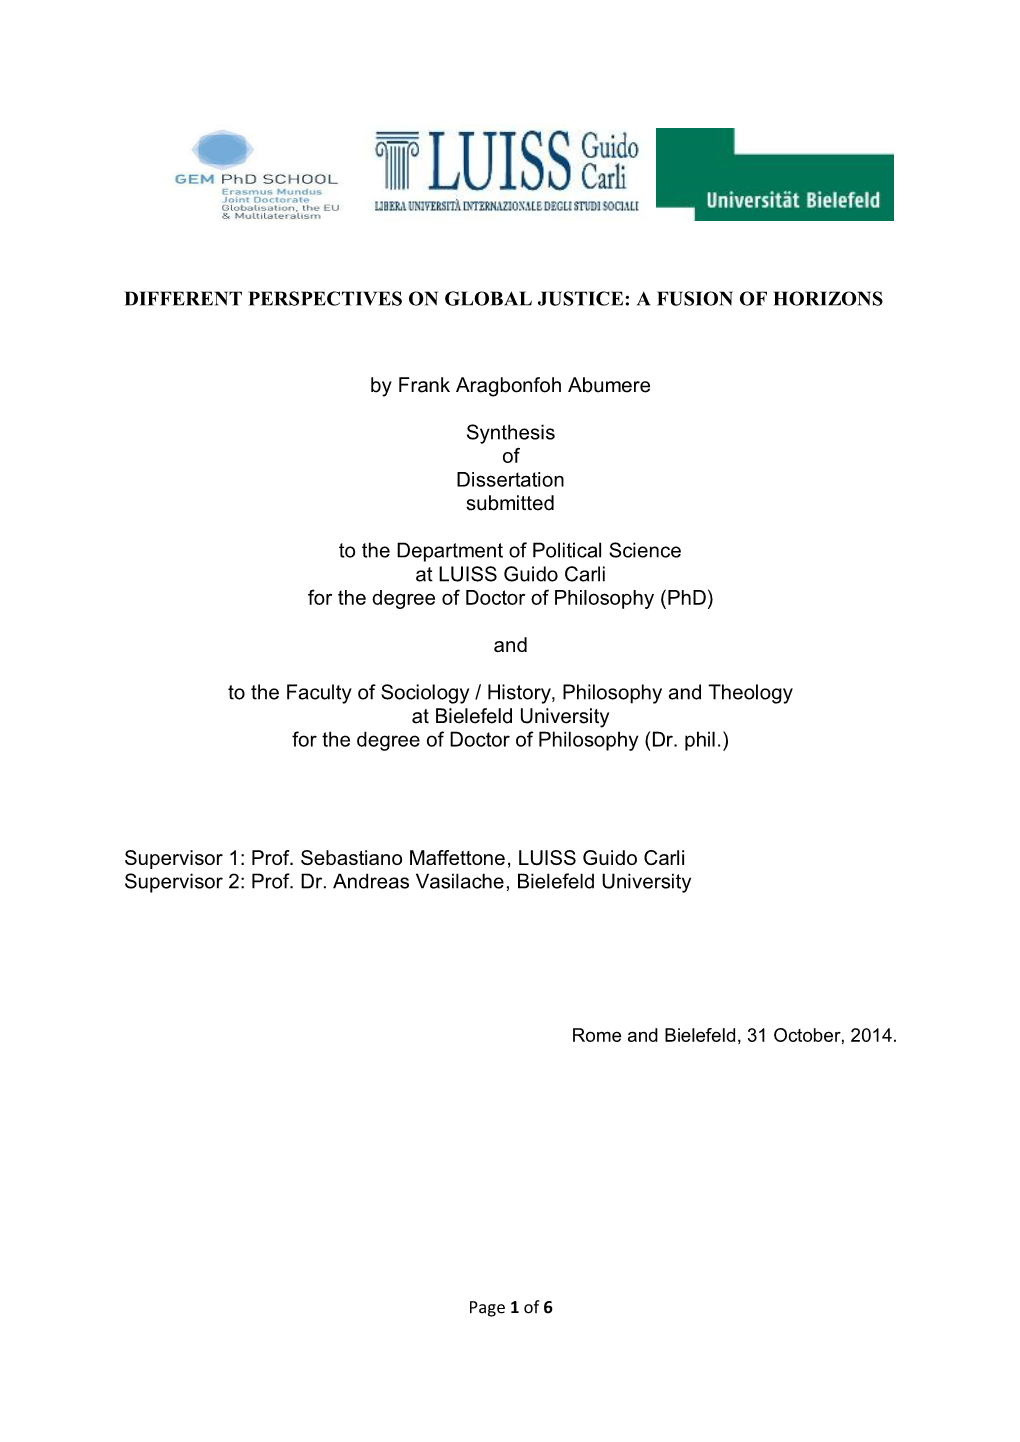 A FUSION of HORIZONS by Frank Aragbonfoh Abumere Synthesis of Dissertation Submitted